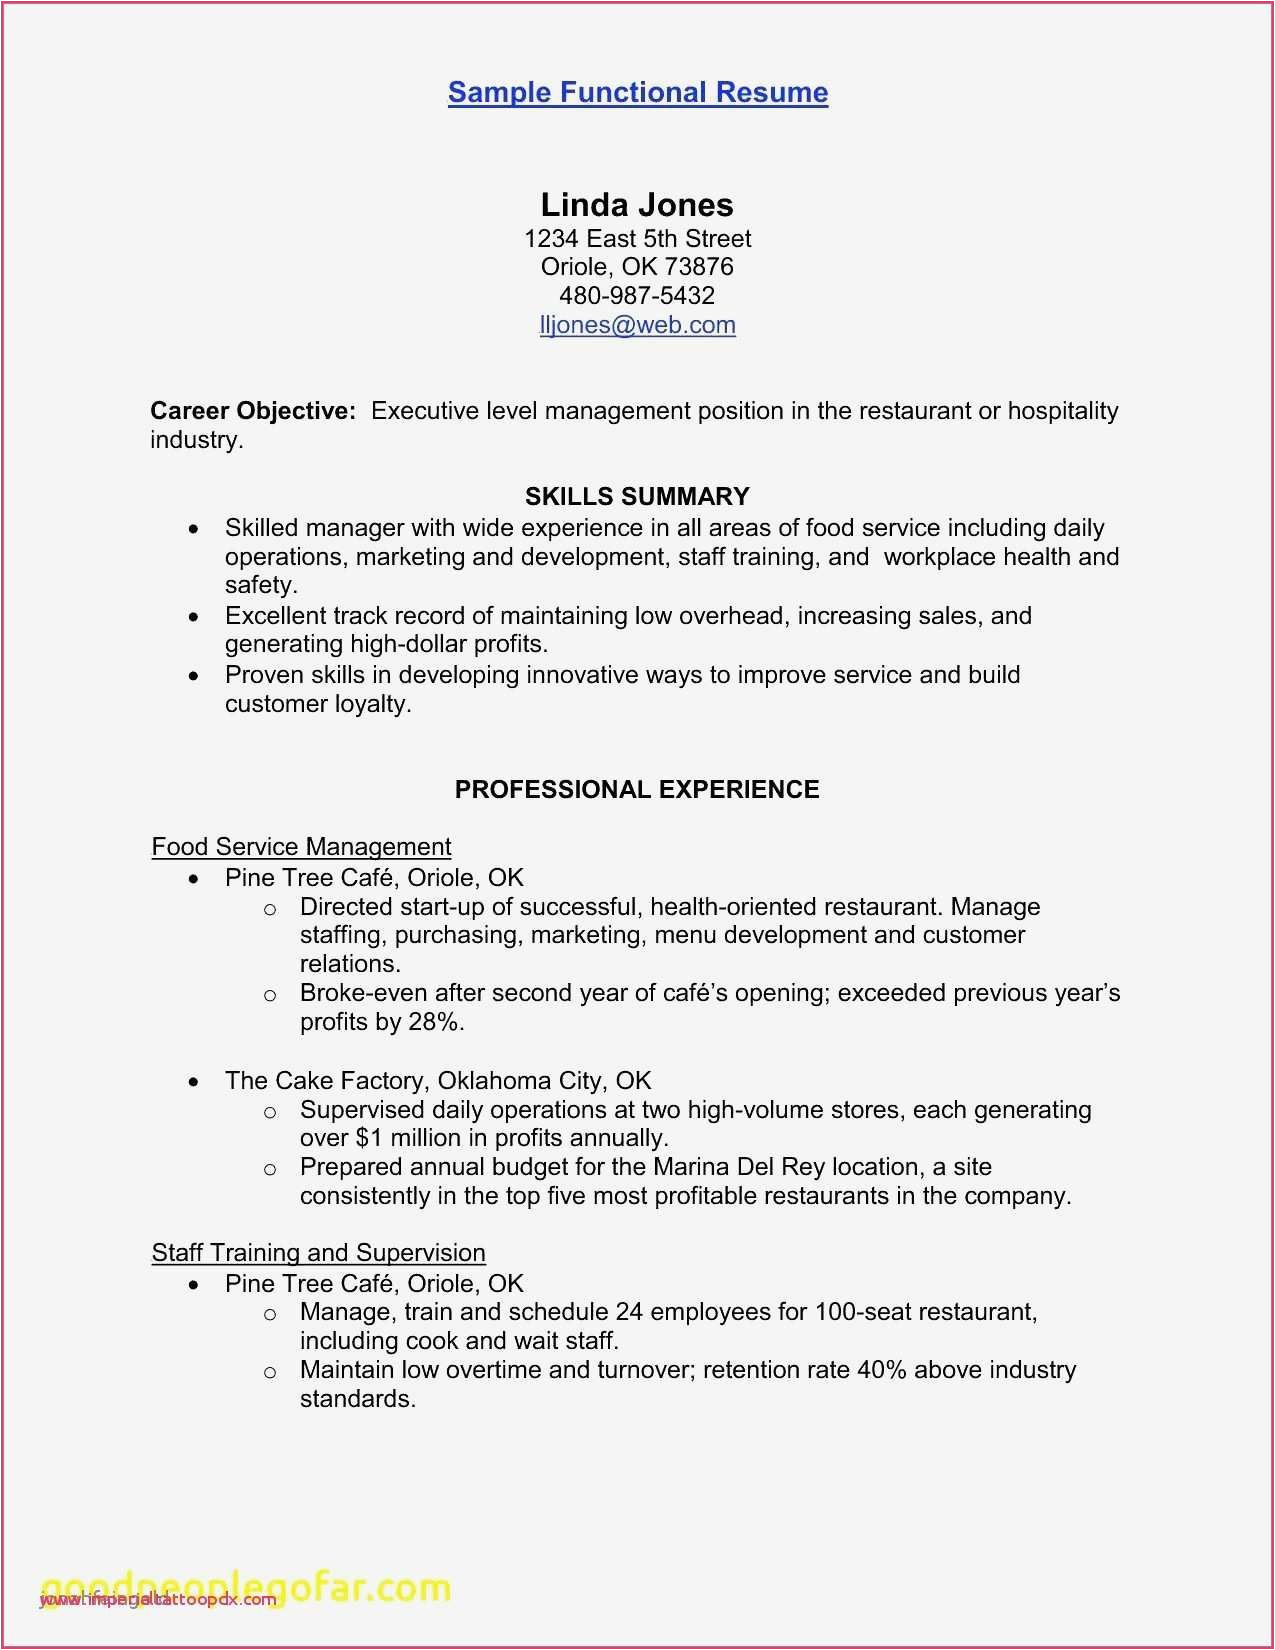 Sample Resume for Warehouse Manager In India 67 Beautiful S Sample Resume for Warehouse Manager